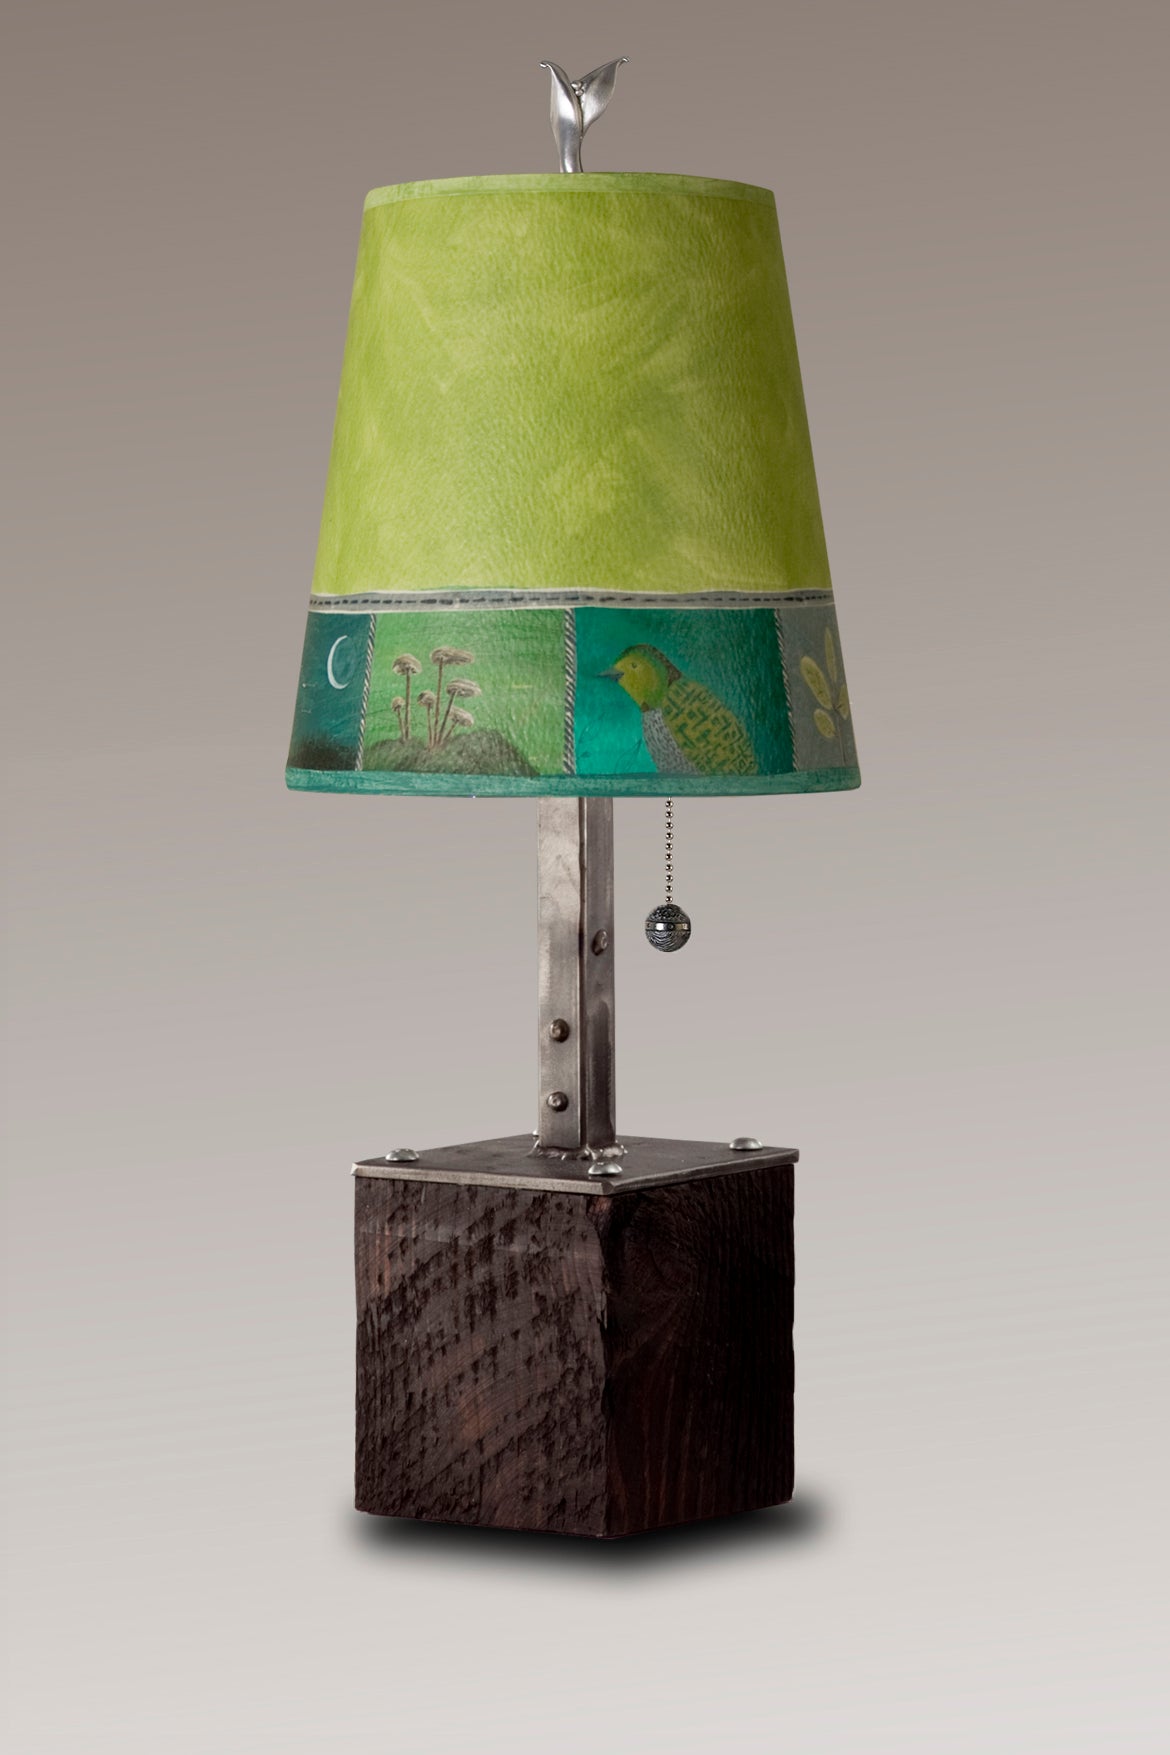 Janna Ugone &amp; Co Table Lamps Steel Table Lamp on Reclaimed Wood with Small Drum Shade in Woodland Trails in Leaf